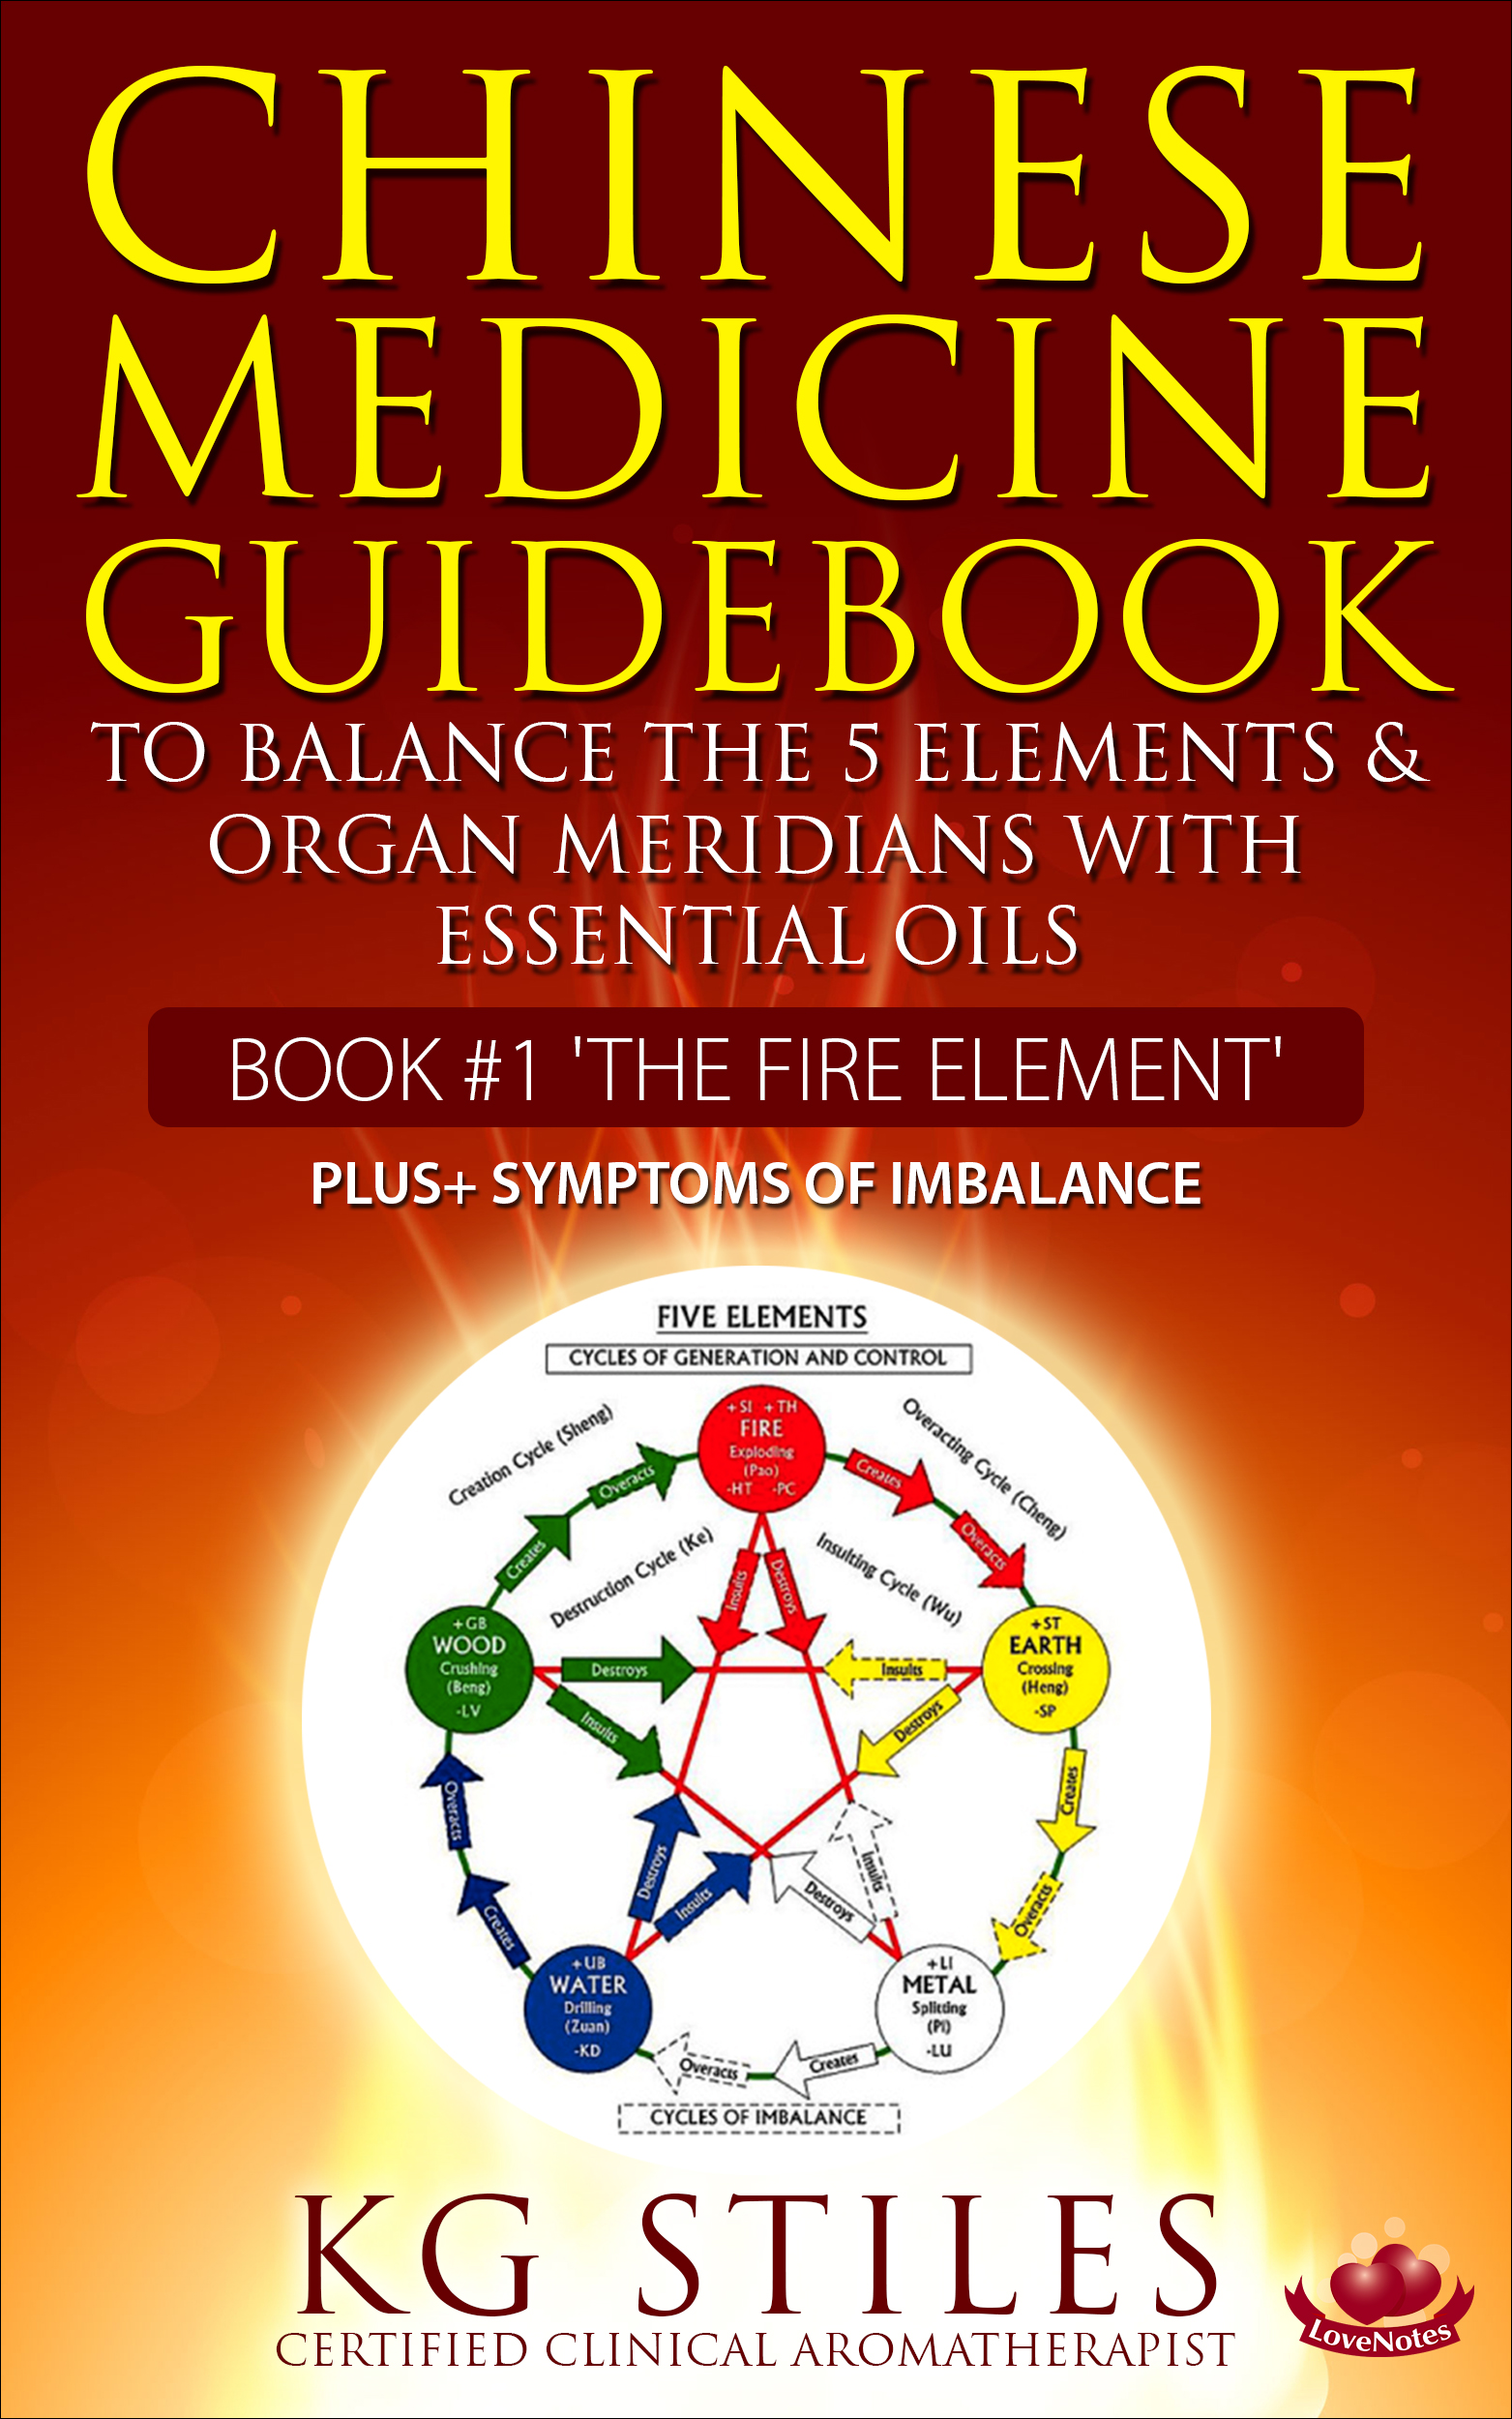 Essential Oils to Balance the Fire Element & Organ Meridians